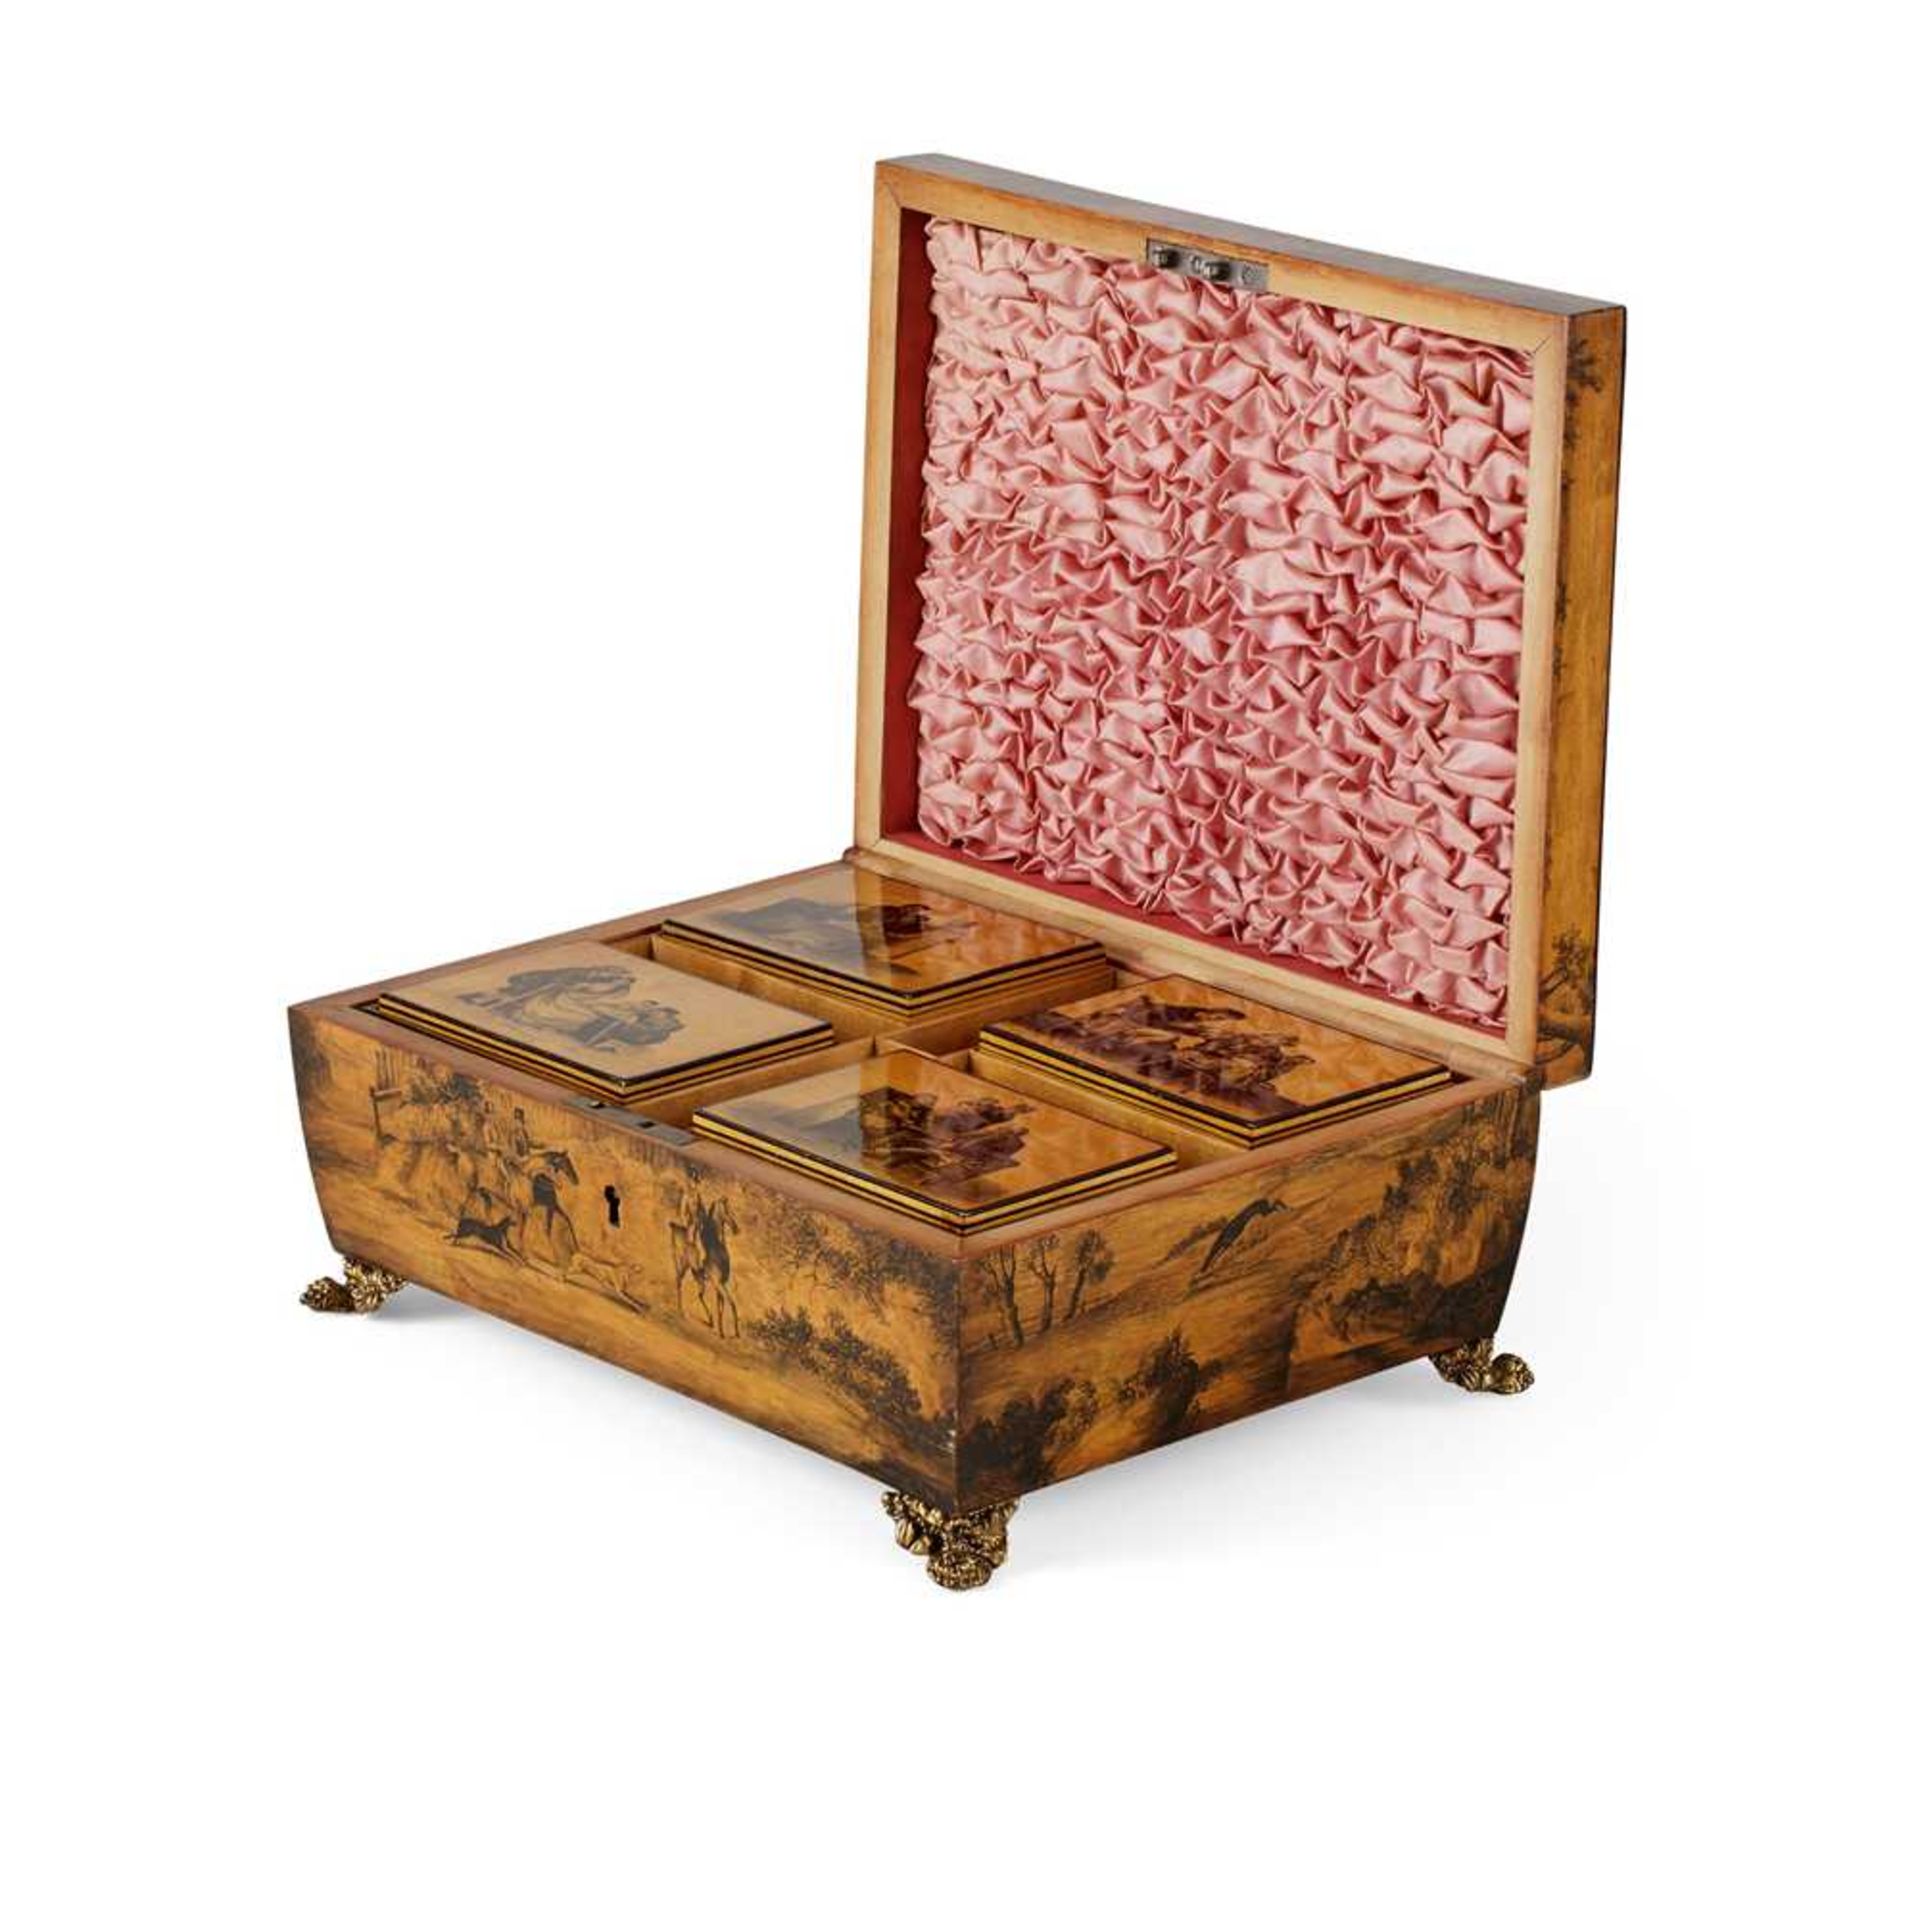 SCOTTISH PENWORK GAMES BOX, DECORATED WITH SCENES AFTER DAVID WILKIE EARLY 19TH CENTURY - Image 2 of 2